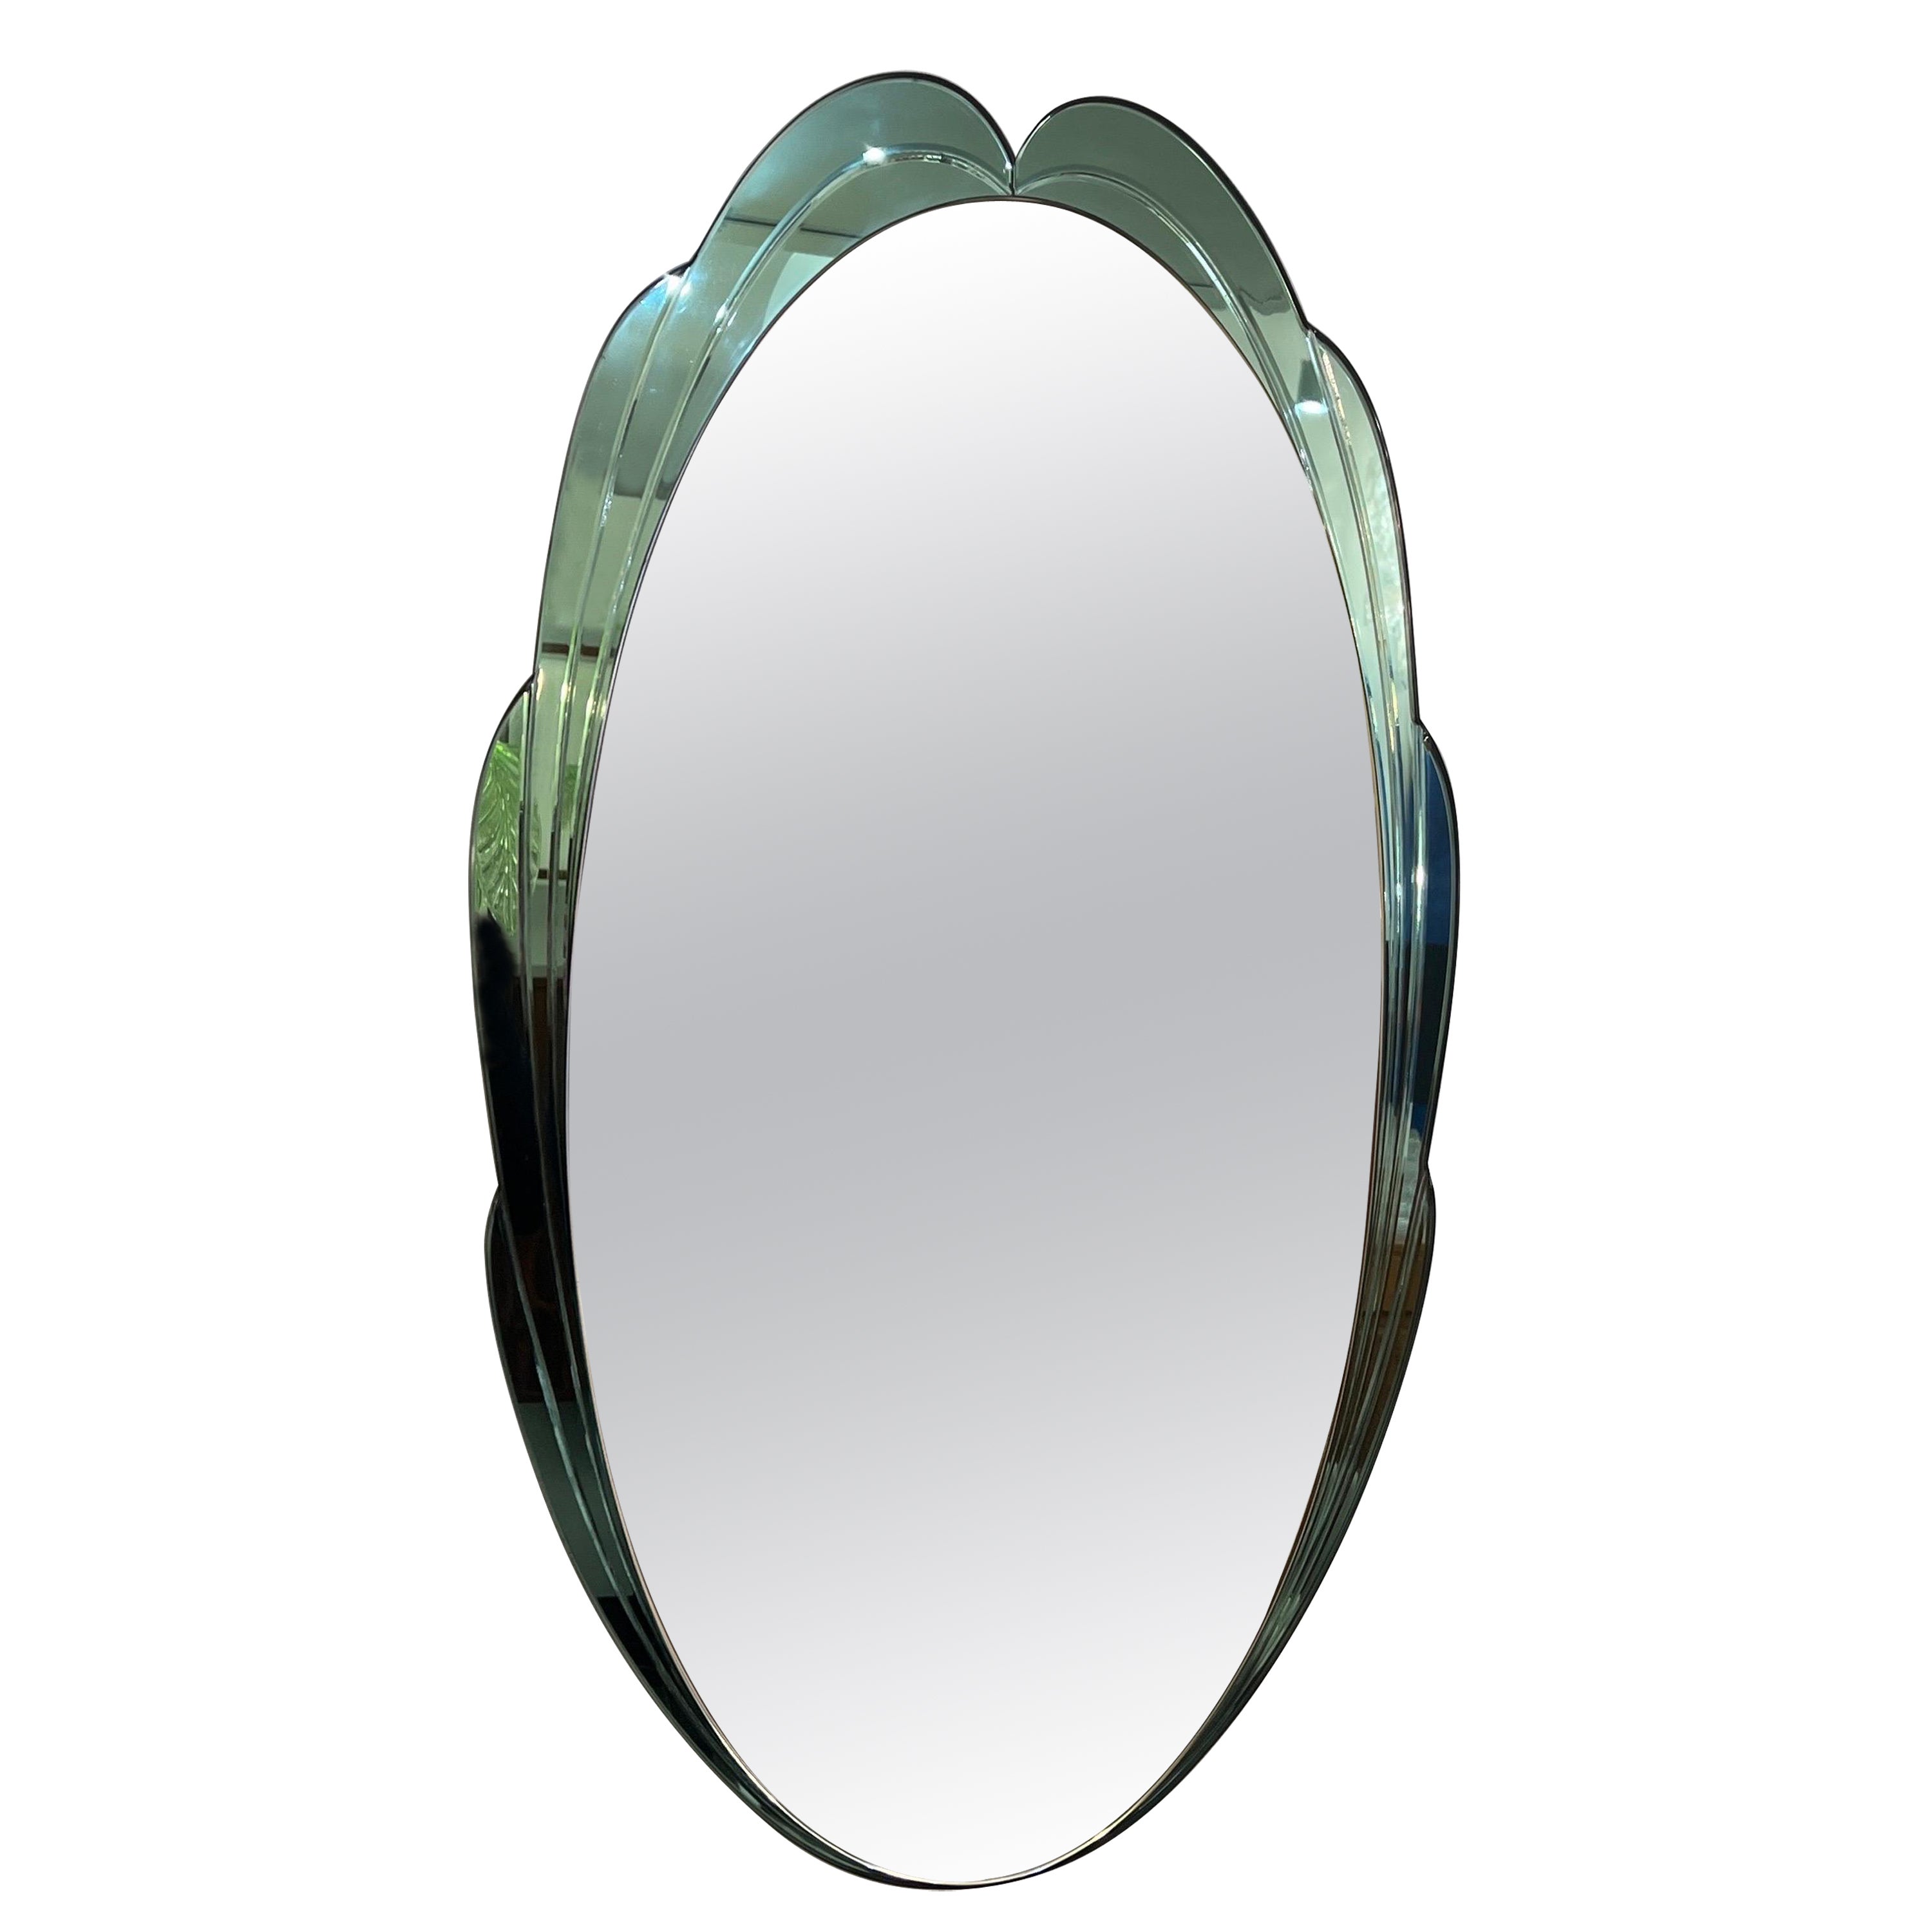 LargexCristal Arte mirror with a green mirrored frame 